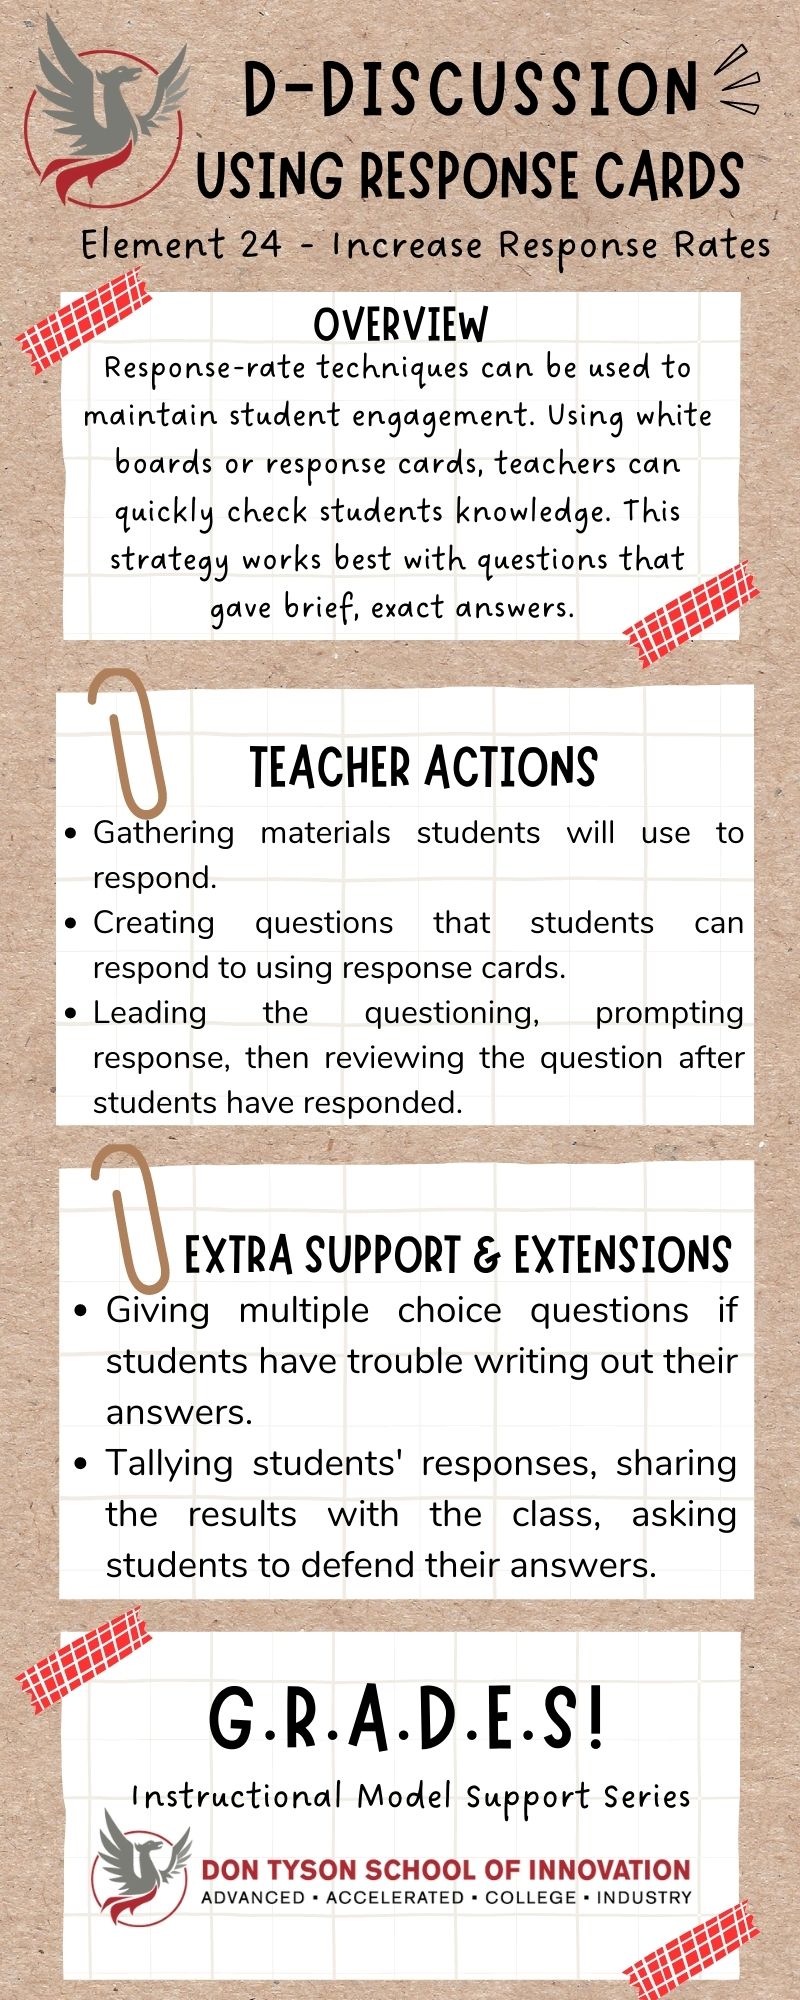 Discussion - Using Response Cards